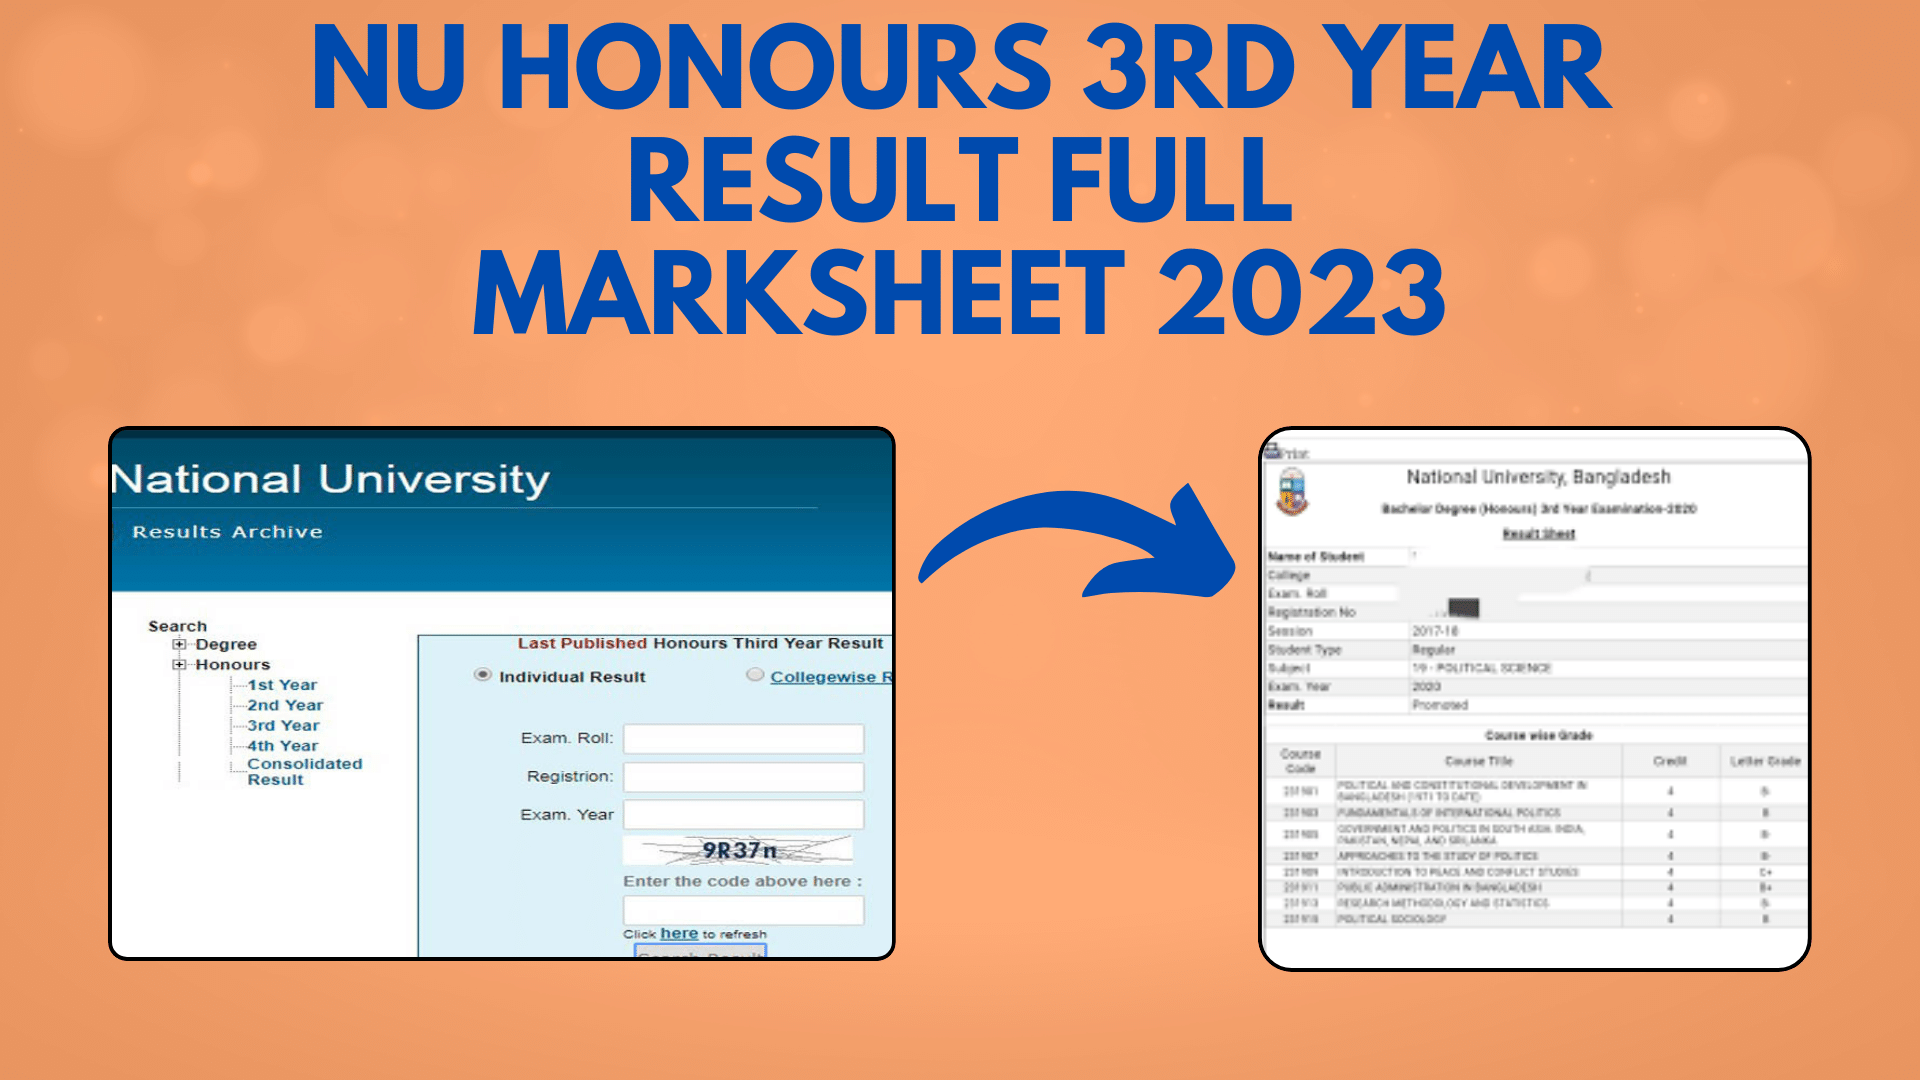 NU Honours 3rd Year Result with Marksheet 2023